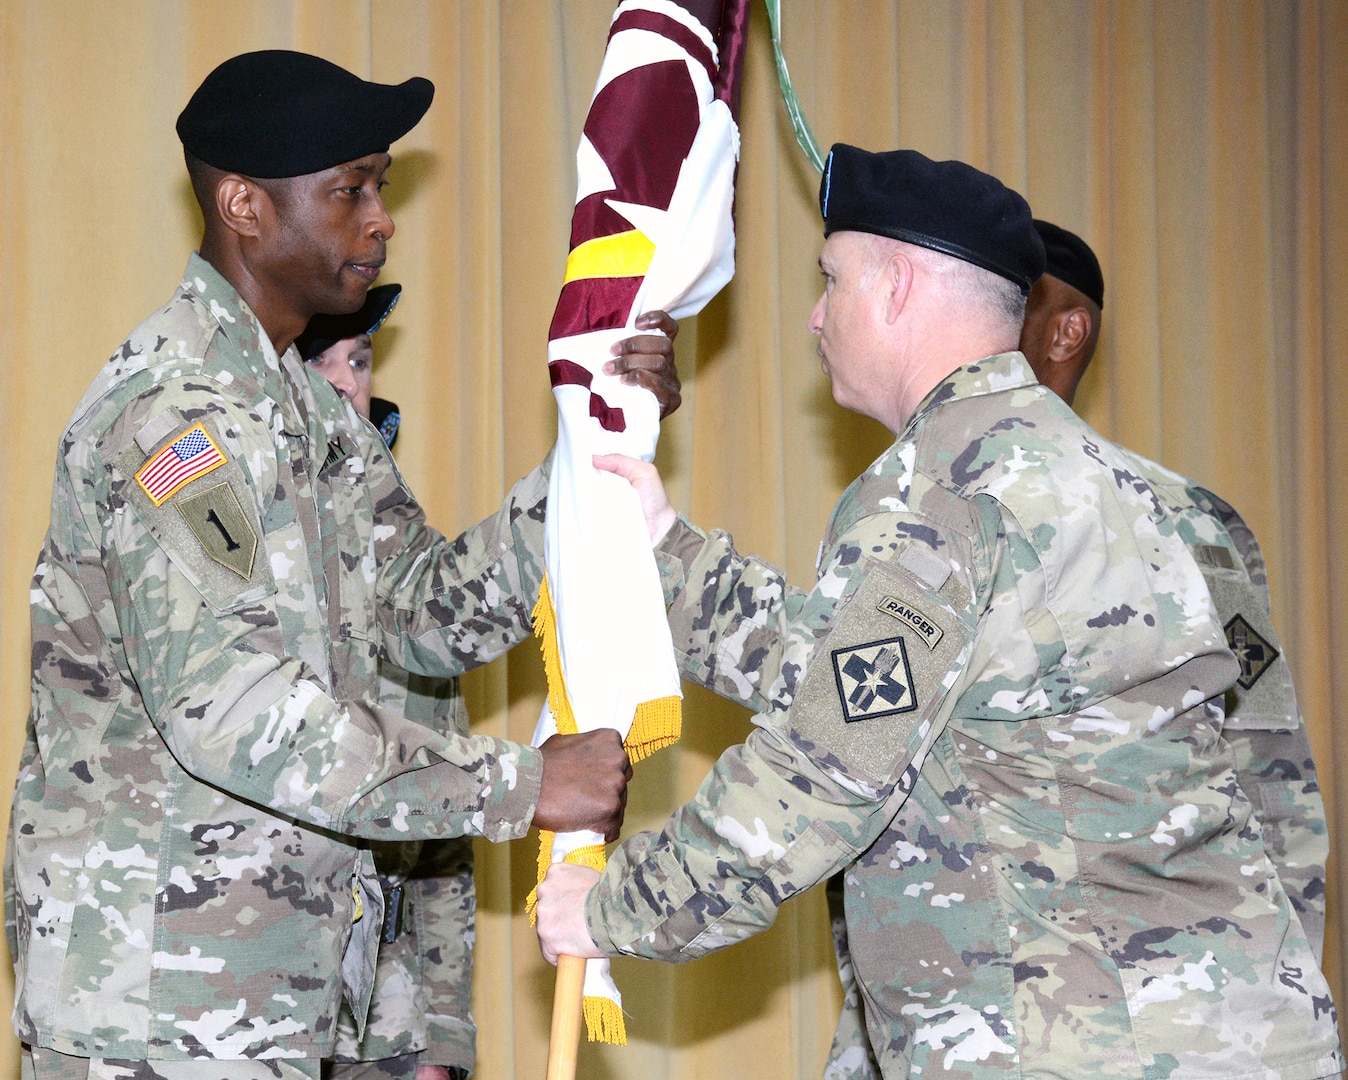 Col. Clinton W. Schreckhise (right), commander, 32nd Medical Brigade, presided over the change of responsibility ceremony as Command Sgt. Maj. Thomas R. Oates relinquished responsibility to Command Sgt. Maj. Carlisie Y. Jones (left) at Blesse Auditorium at the Army Medical Department Center & School at Joint Base San Antonio-Fort Sam Houston May 1. Oates is transitioning to serve as the command sergeant major at Brooke Army Medical Center. Jones comes to the 32nd Medical Brigade from the Medical Professional Training Brigade.